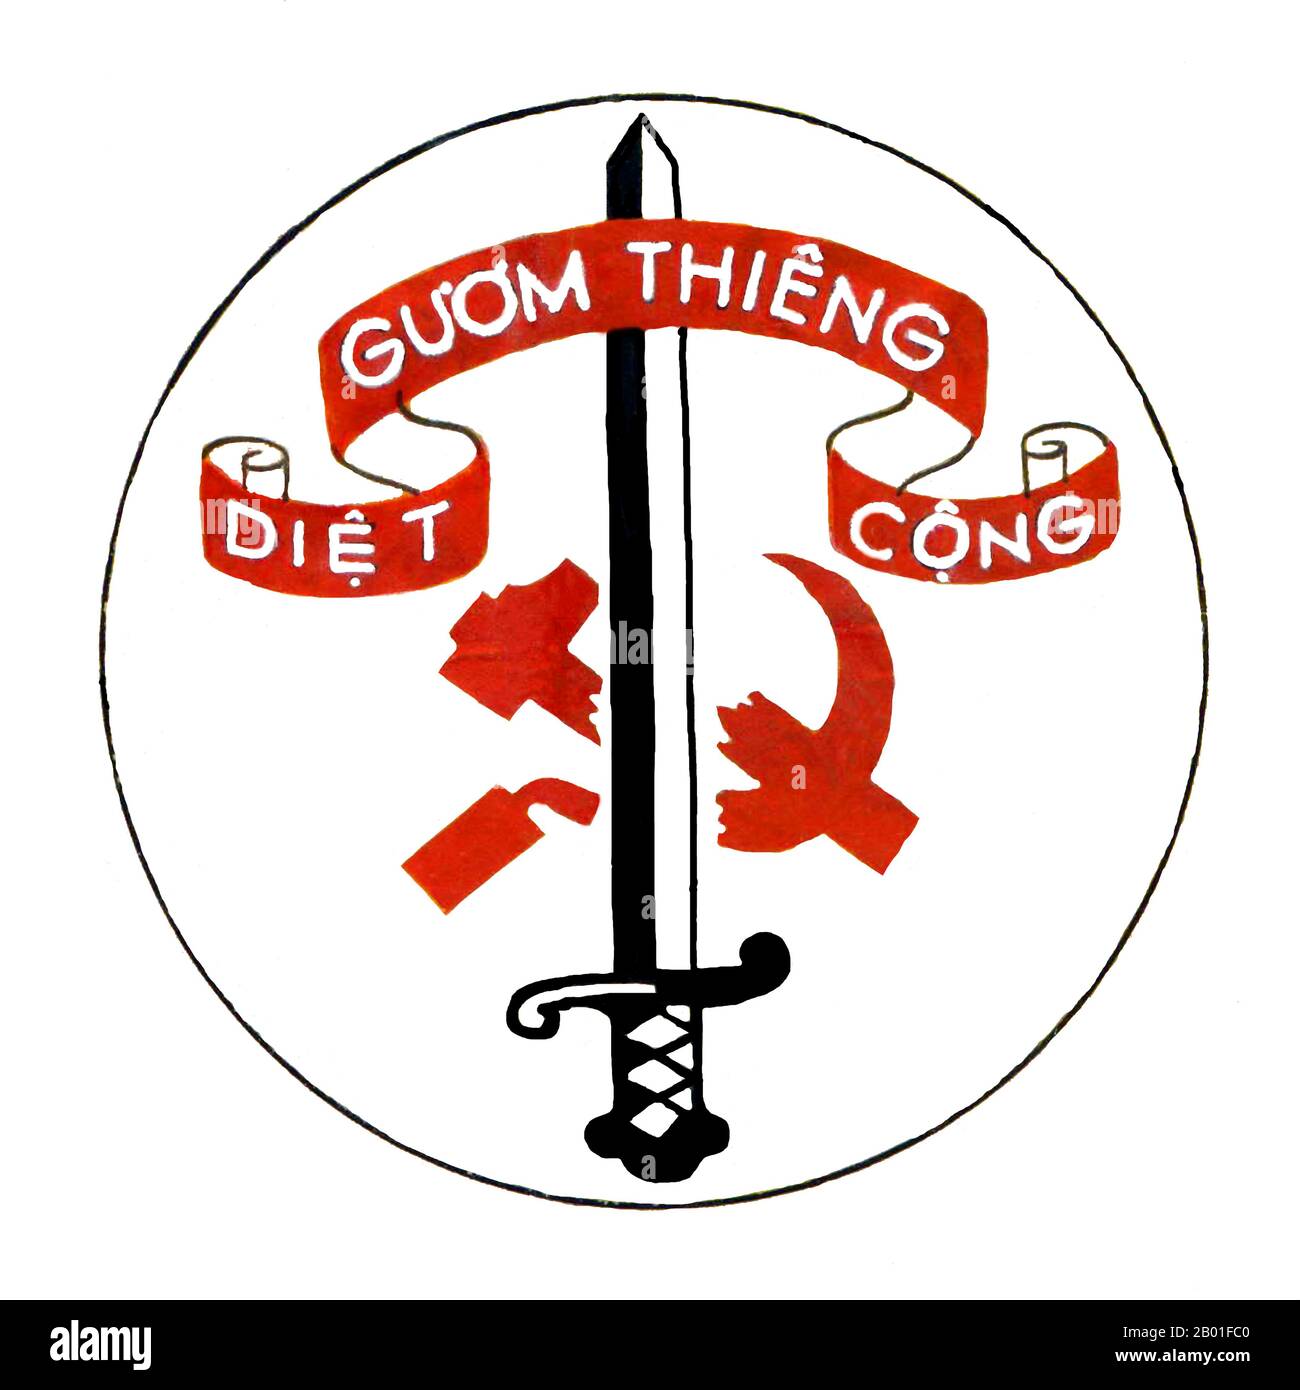 Vietnam: US/South Vietnamese 'black propaganda' insignia for the Sacred Sword of the Patriots League (SSPL), distributed clandestinely in North Vietnam -  'gươm thiêng diết cộng' or 'Sacred Sword to Kill Communists', c. 1960s.  The innocuously named Studies and Observations Group (SOG) was a secret American military unit of elite troops best known for covert operations behind enemy lines such as surveillance, hit-and-run, search and rescue, sabotage, snatching prisoners and setting booby traps. Its Psychological Operations Group was responsible for 'black' propaganda. Stock Photo